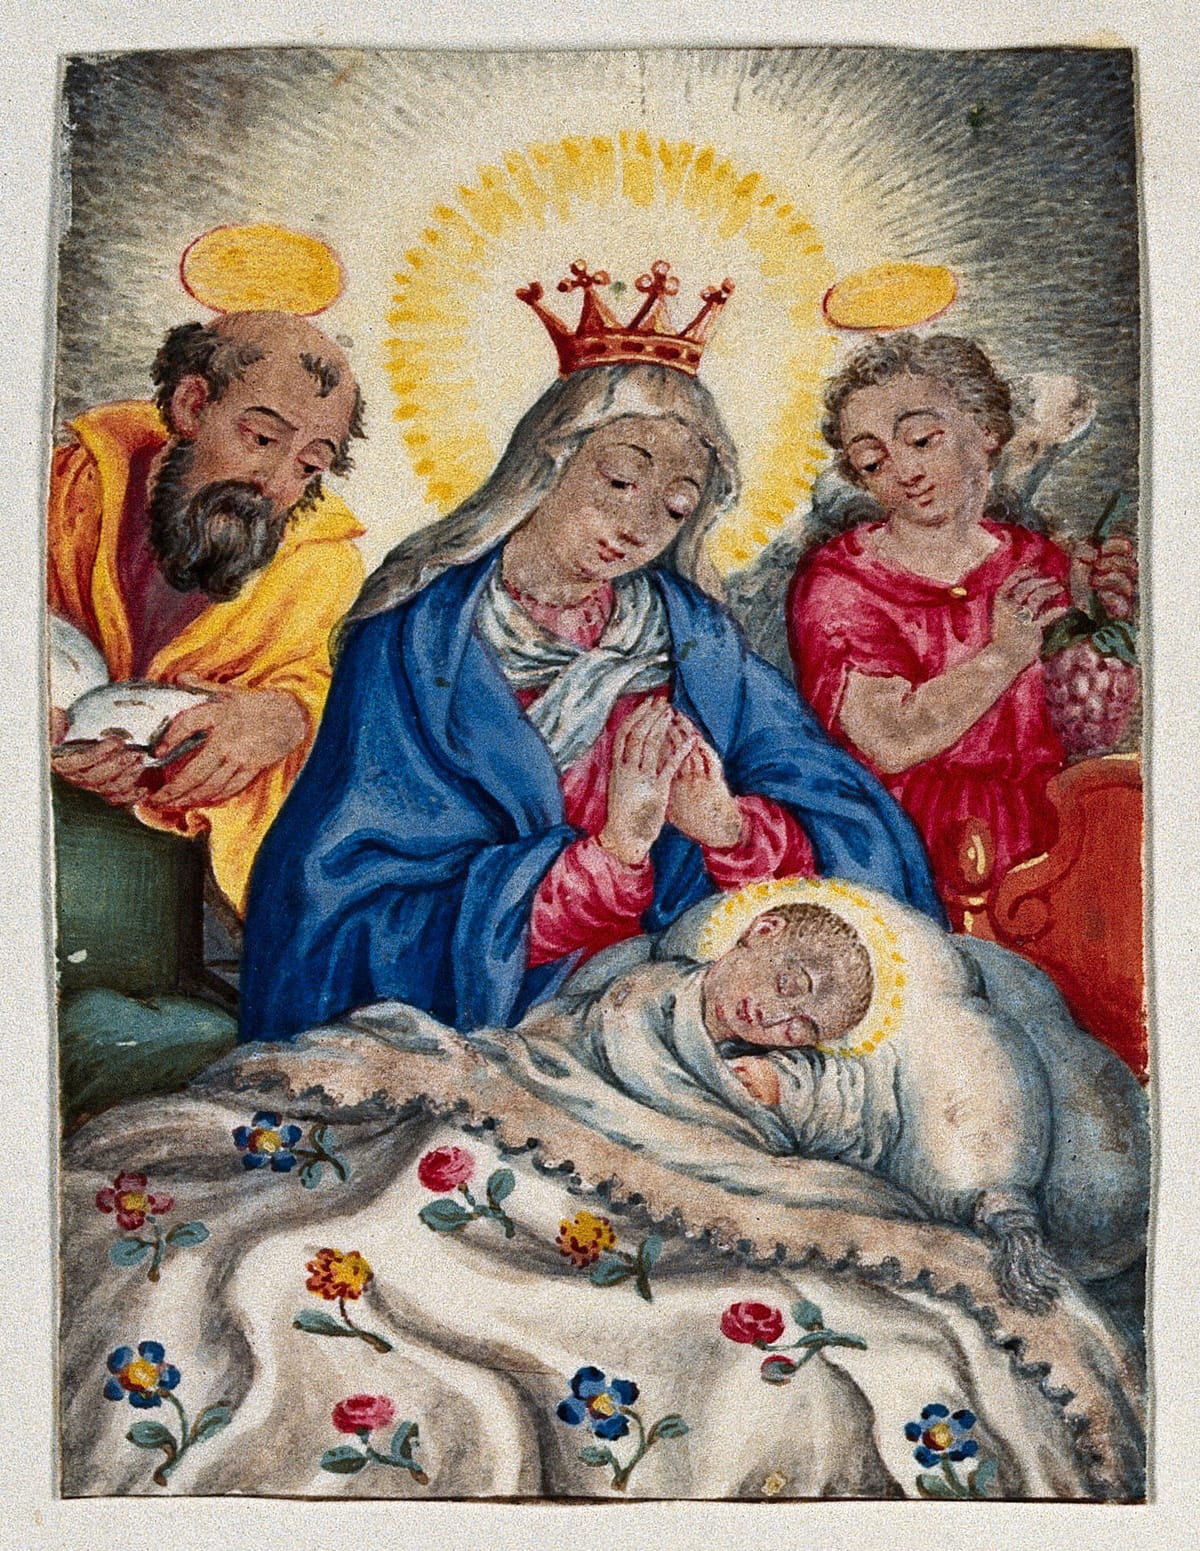 Saint Mary (the Blessed Virgin) and Saint Joseph with the Christ Child and an Angel. Gouache Painting (14th-16th Centuries?) Author Unknown - Public Domain Catholic Painting